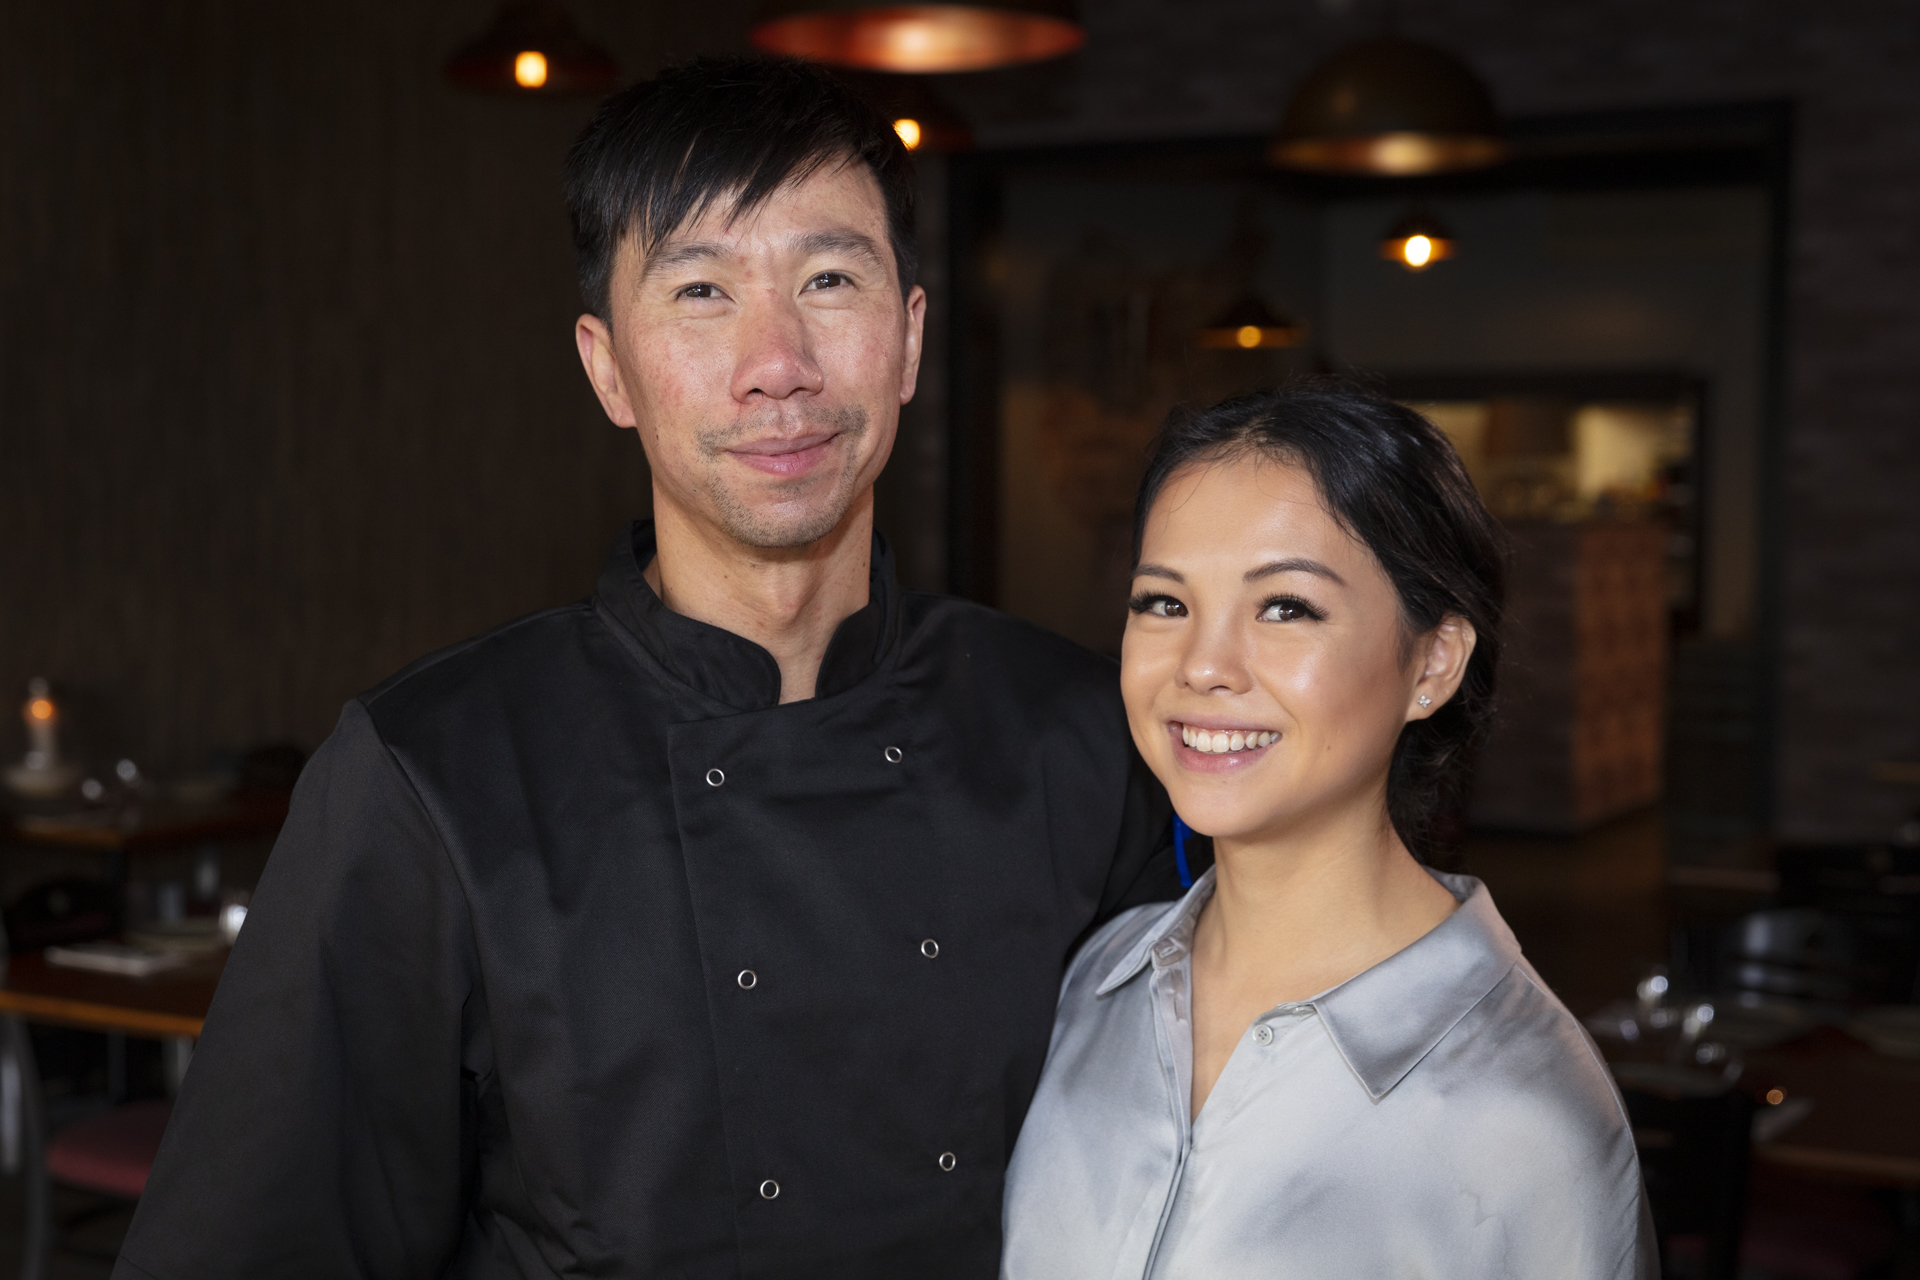 Champi: the new restaurant on the block in old Kingston honouring Grandma’s Laos cooking